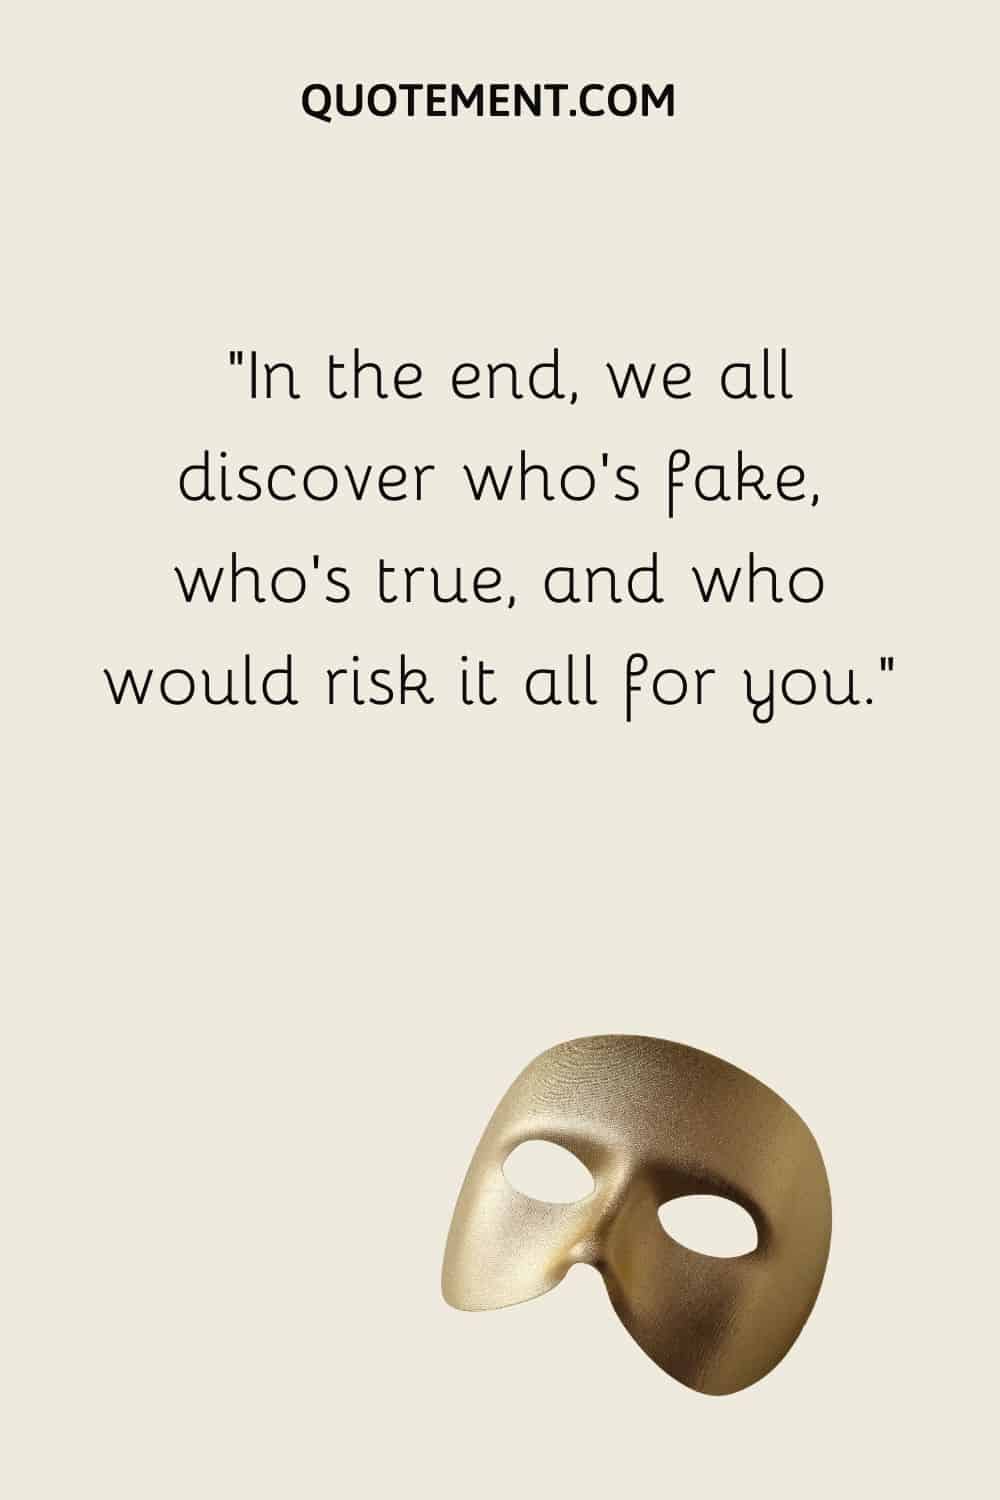 In the end, we all discover who’s fake, who’s true, and who would risk it all for you